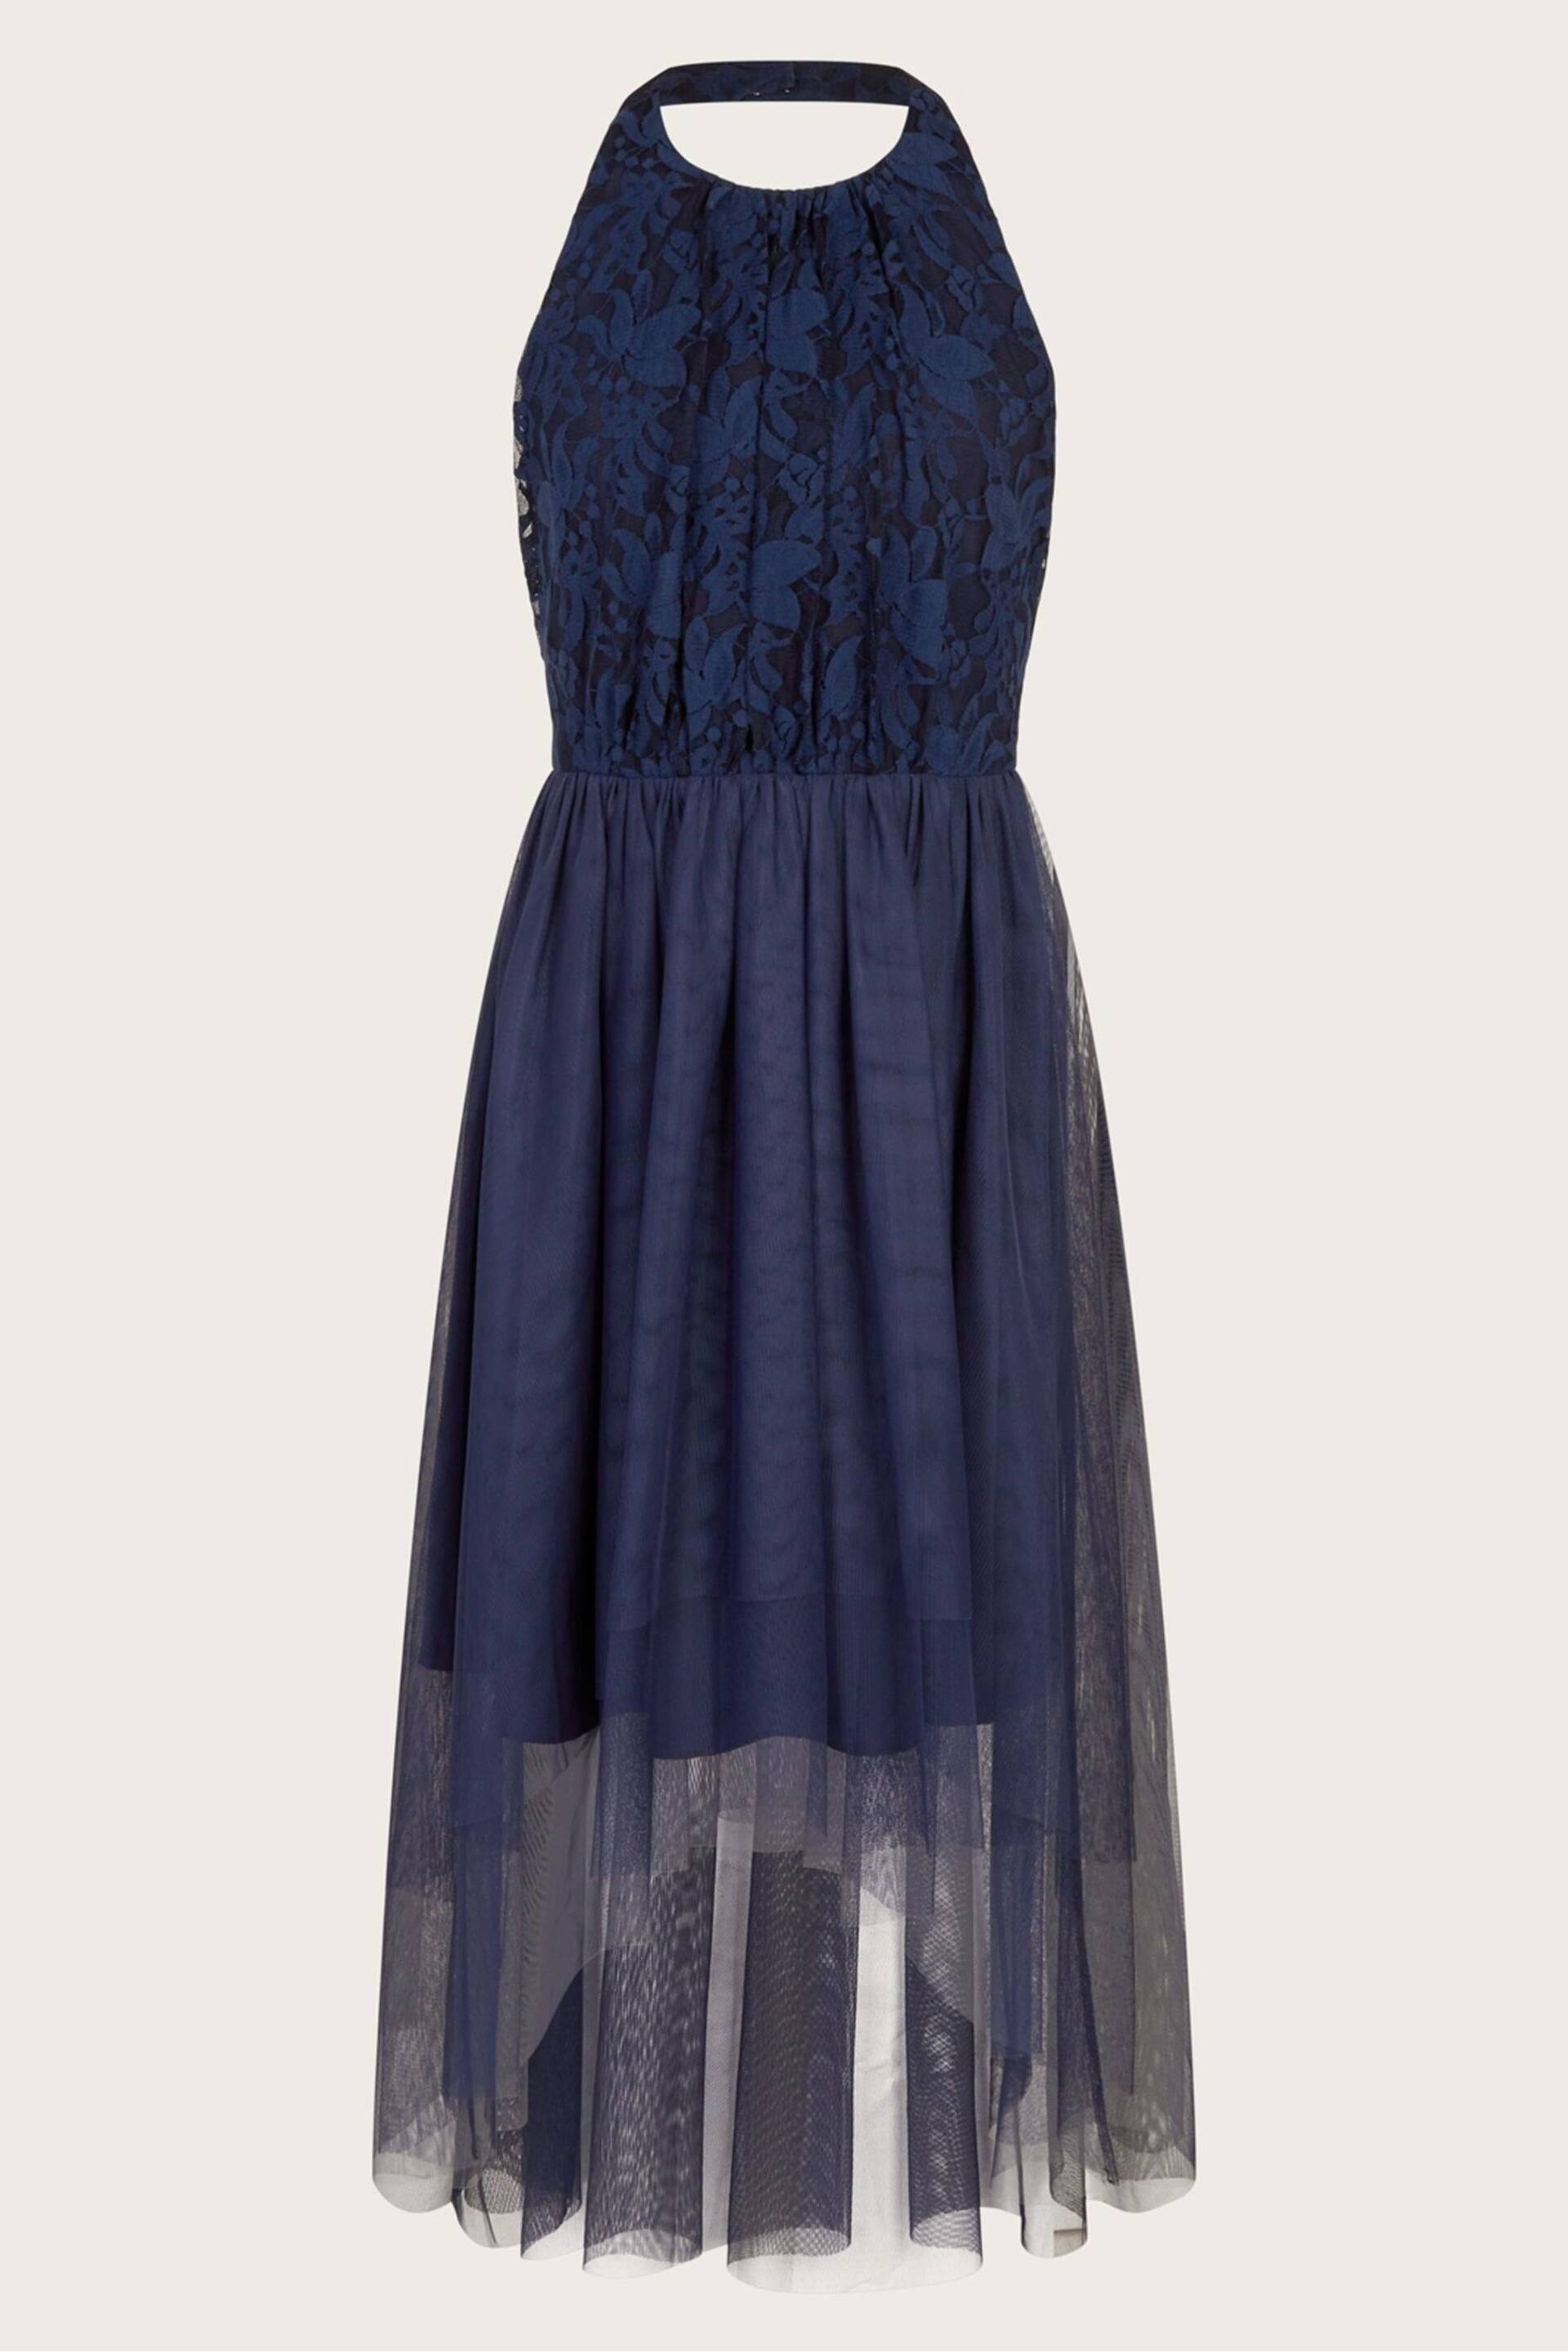 Monsoon Blue Hayley Lace Prom Dress - Image 1 of 3